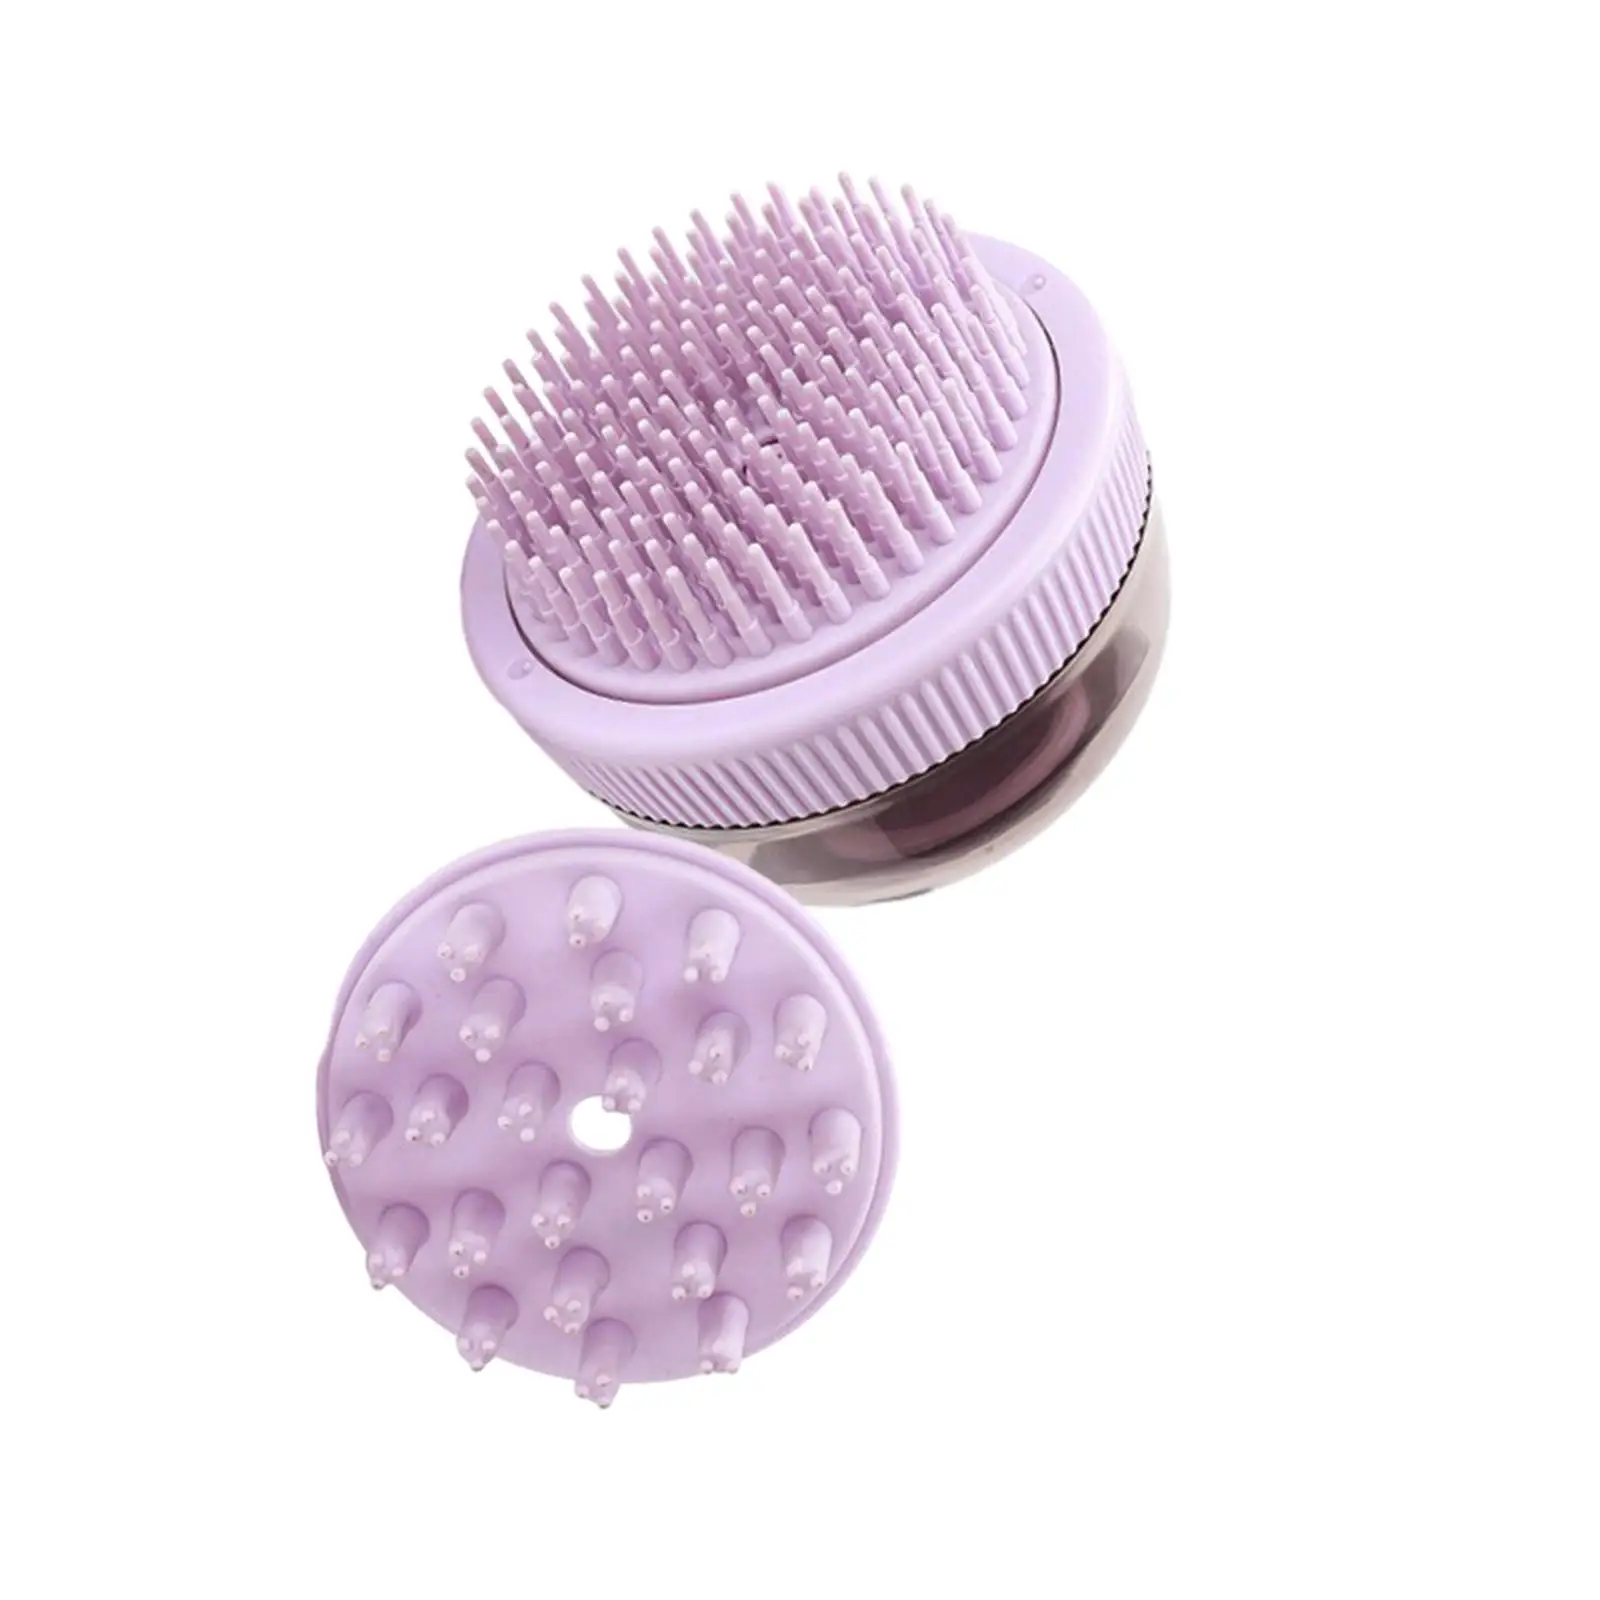 Dog Bath Brush with Soap Dispenser Comfortable Removes Loose Hair Pet Massage Brush Easily to Use for Puppy Kitten Dogs Cats SPA